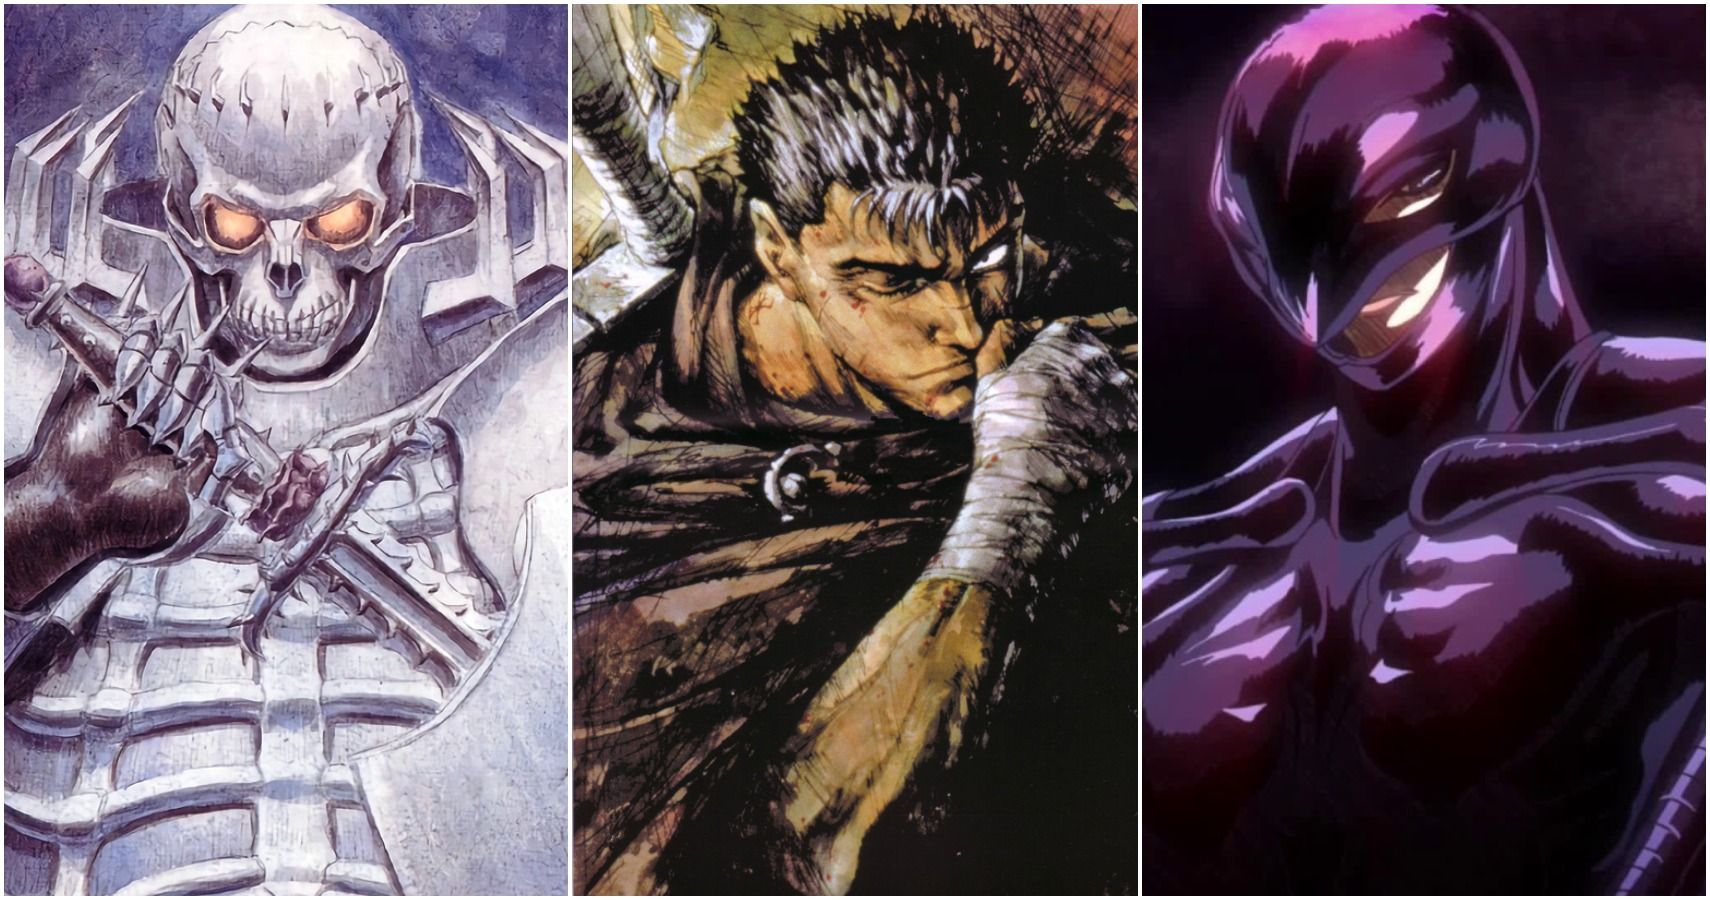 Berserk (1997) Not fully horror but not without its elements and momen